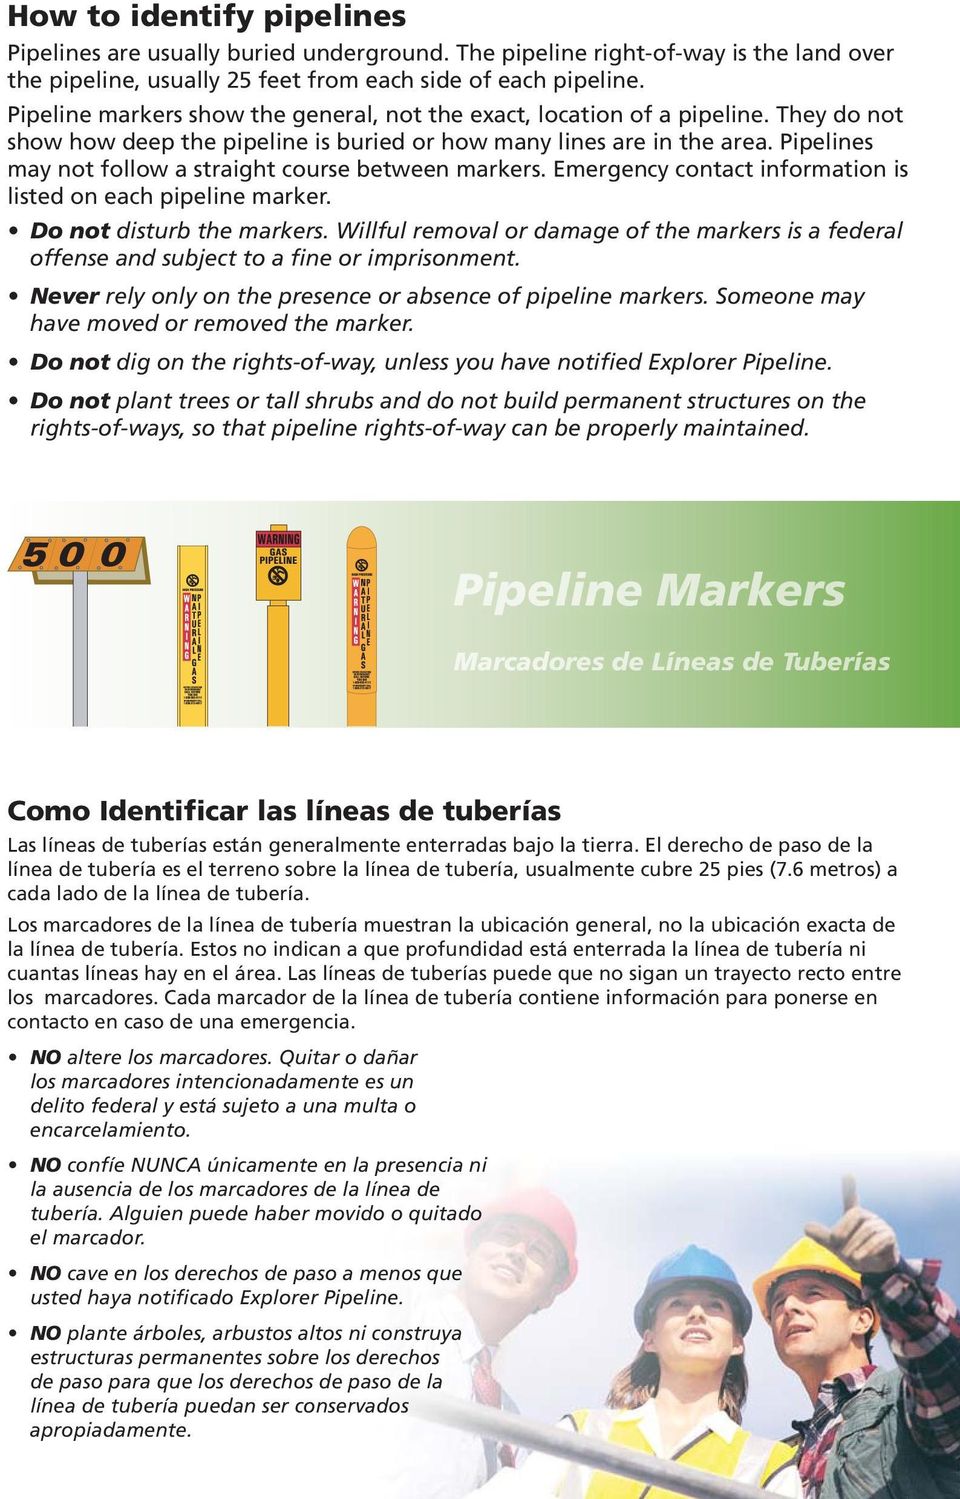 Pipelines may not follow a straight course between markers. Emergency contact information is listed on each pipeline marker. Do not disturb the markers.